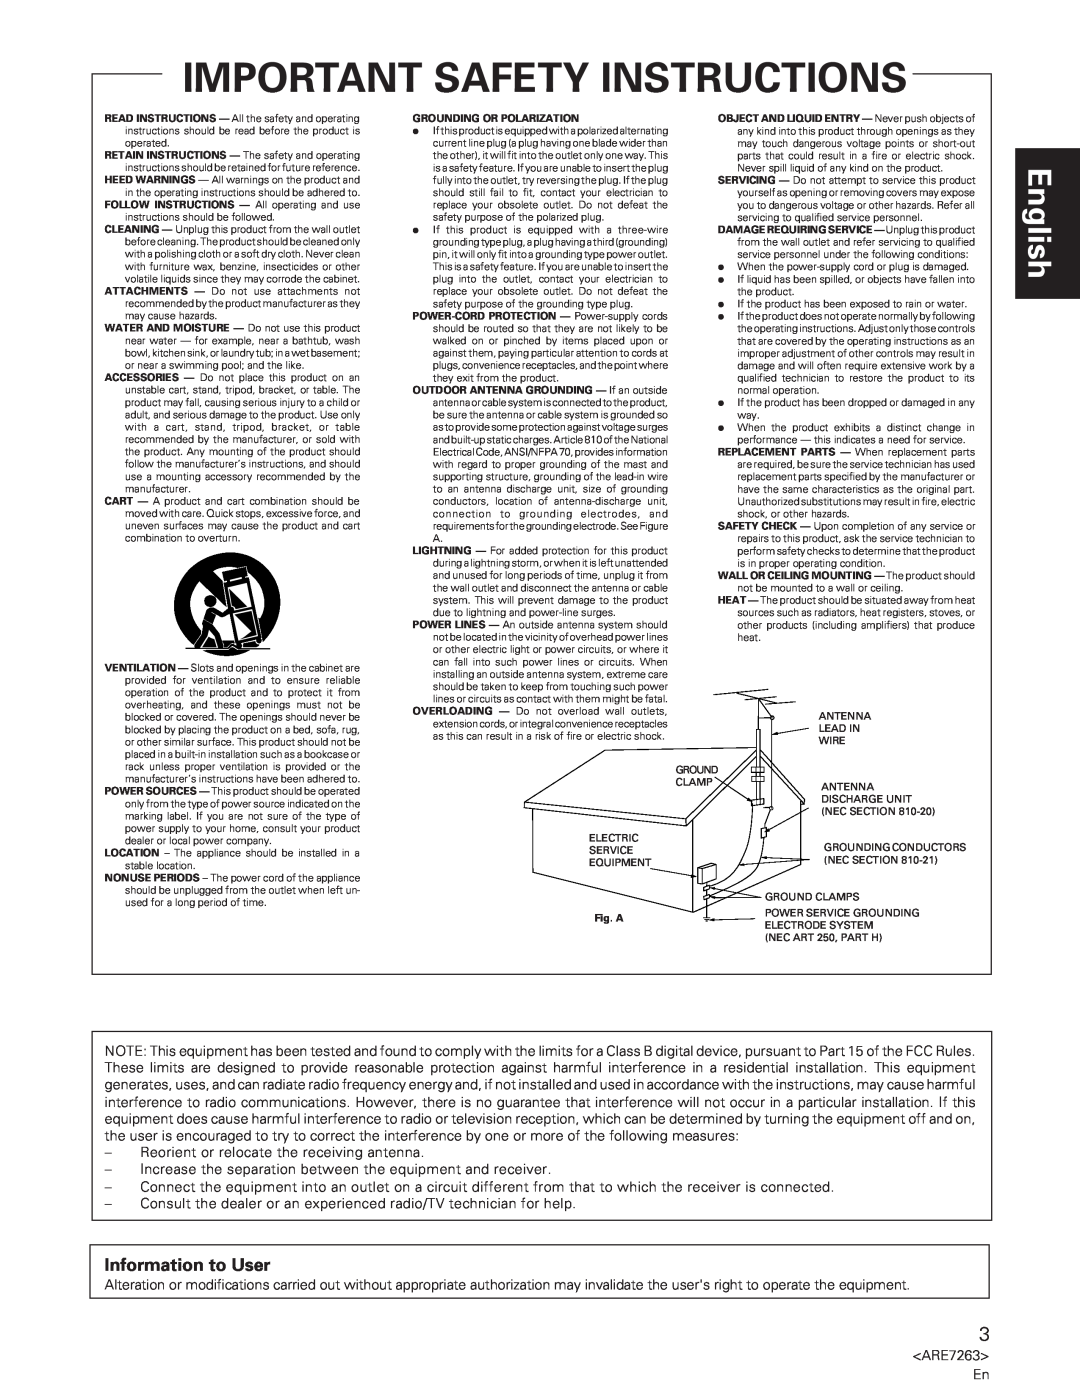 Pioneer A-35R operating instructions Information to User, Important Safety Instructions, English 